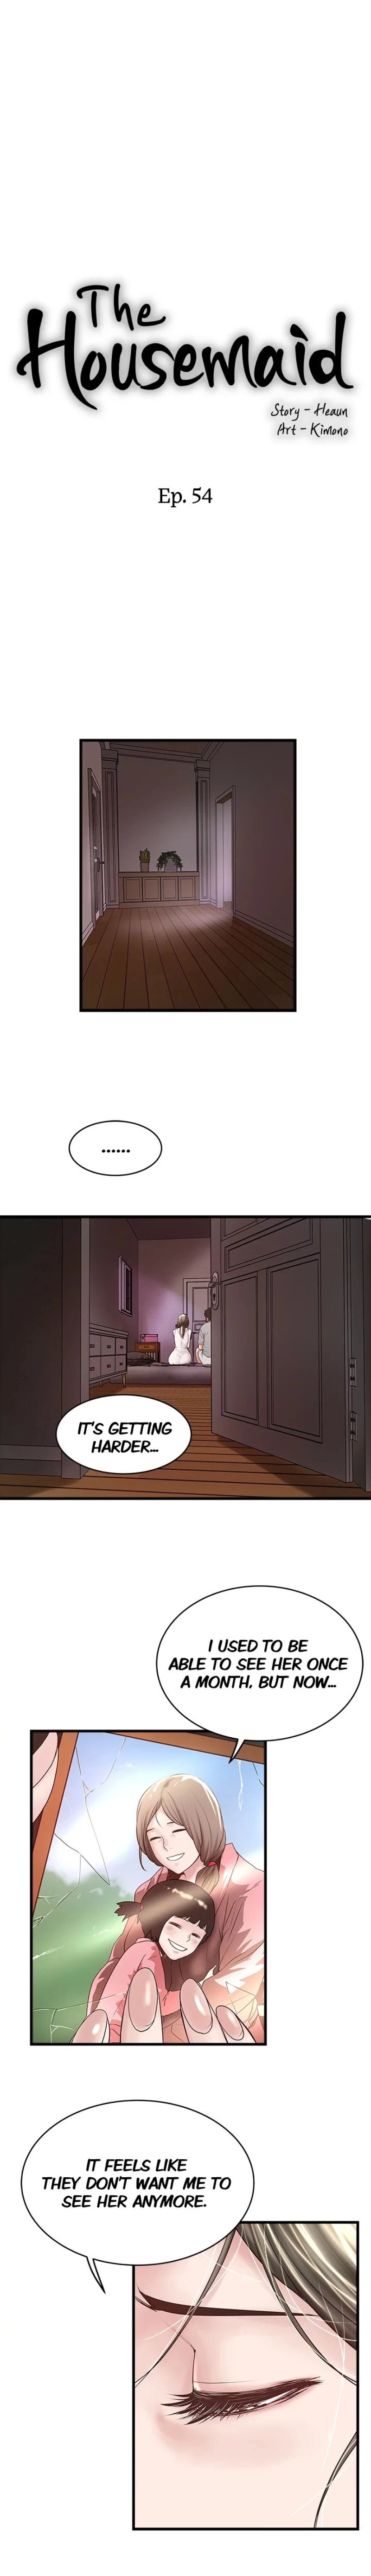 The Housemaid - Chapter 54 Page 1